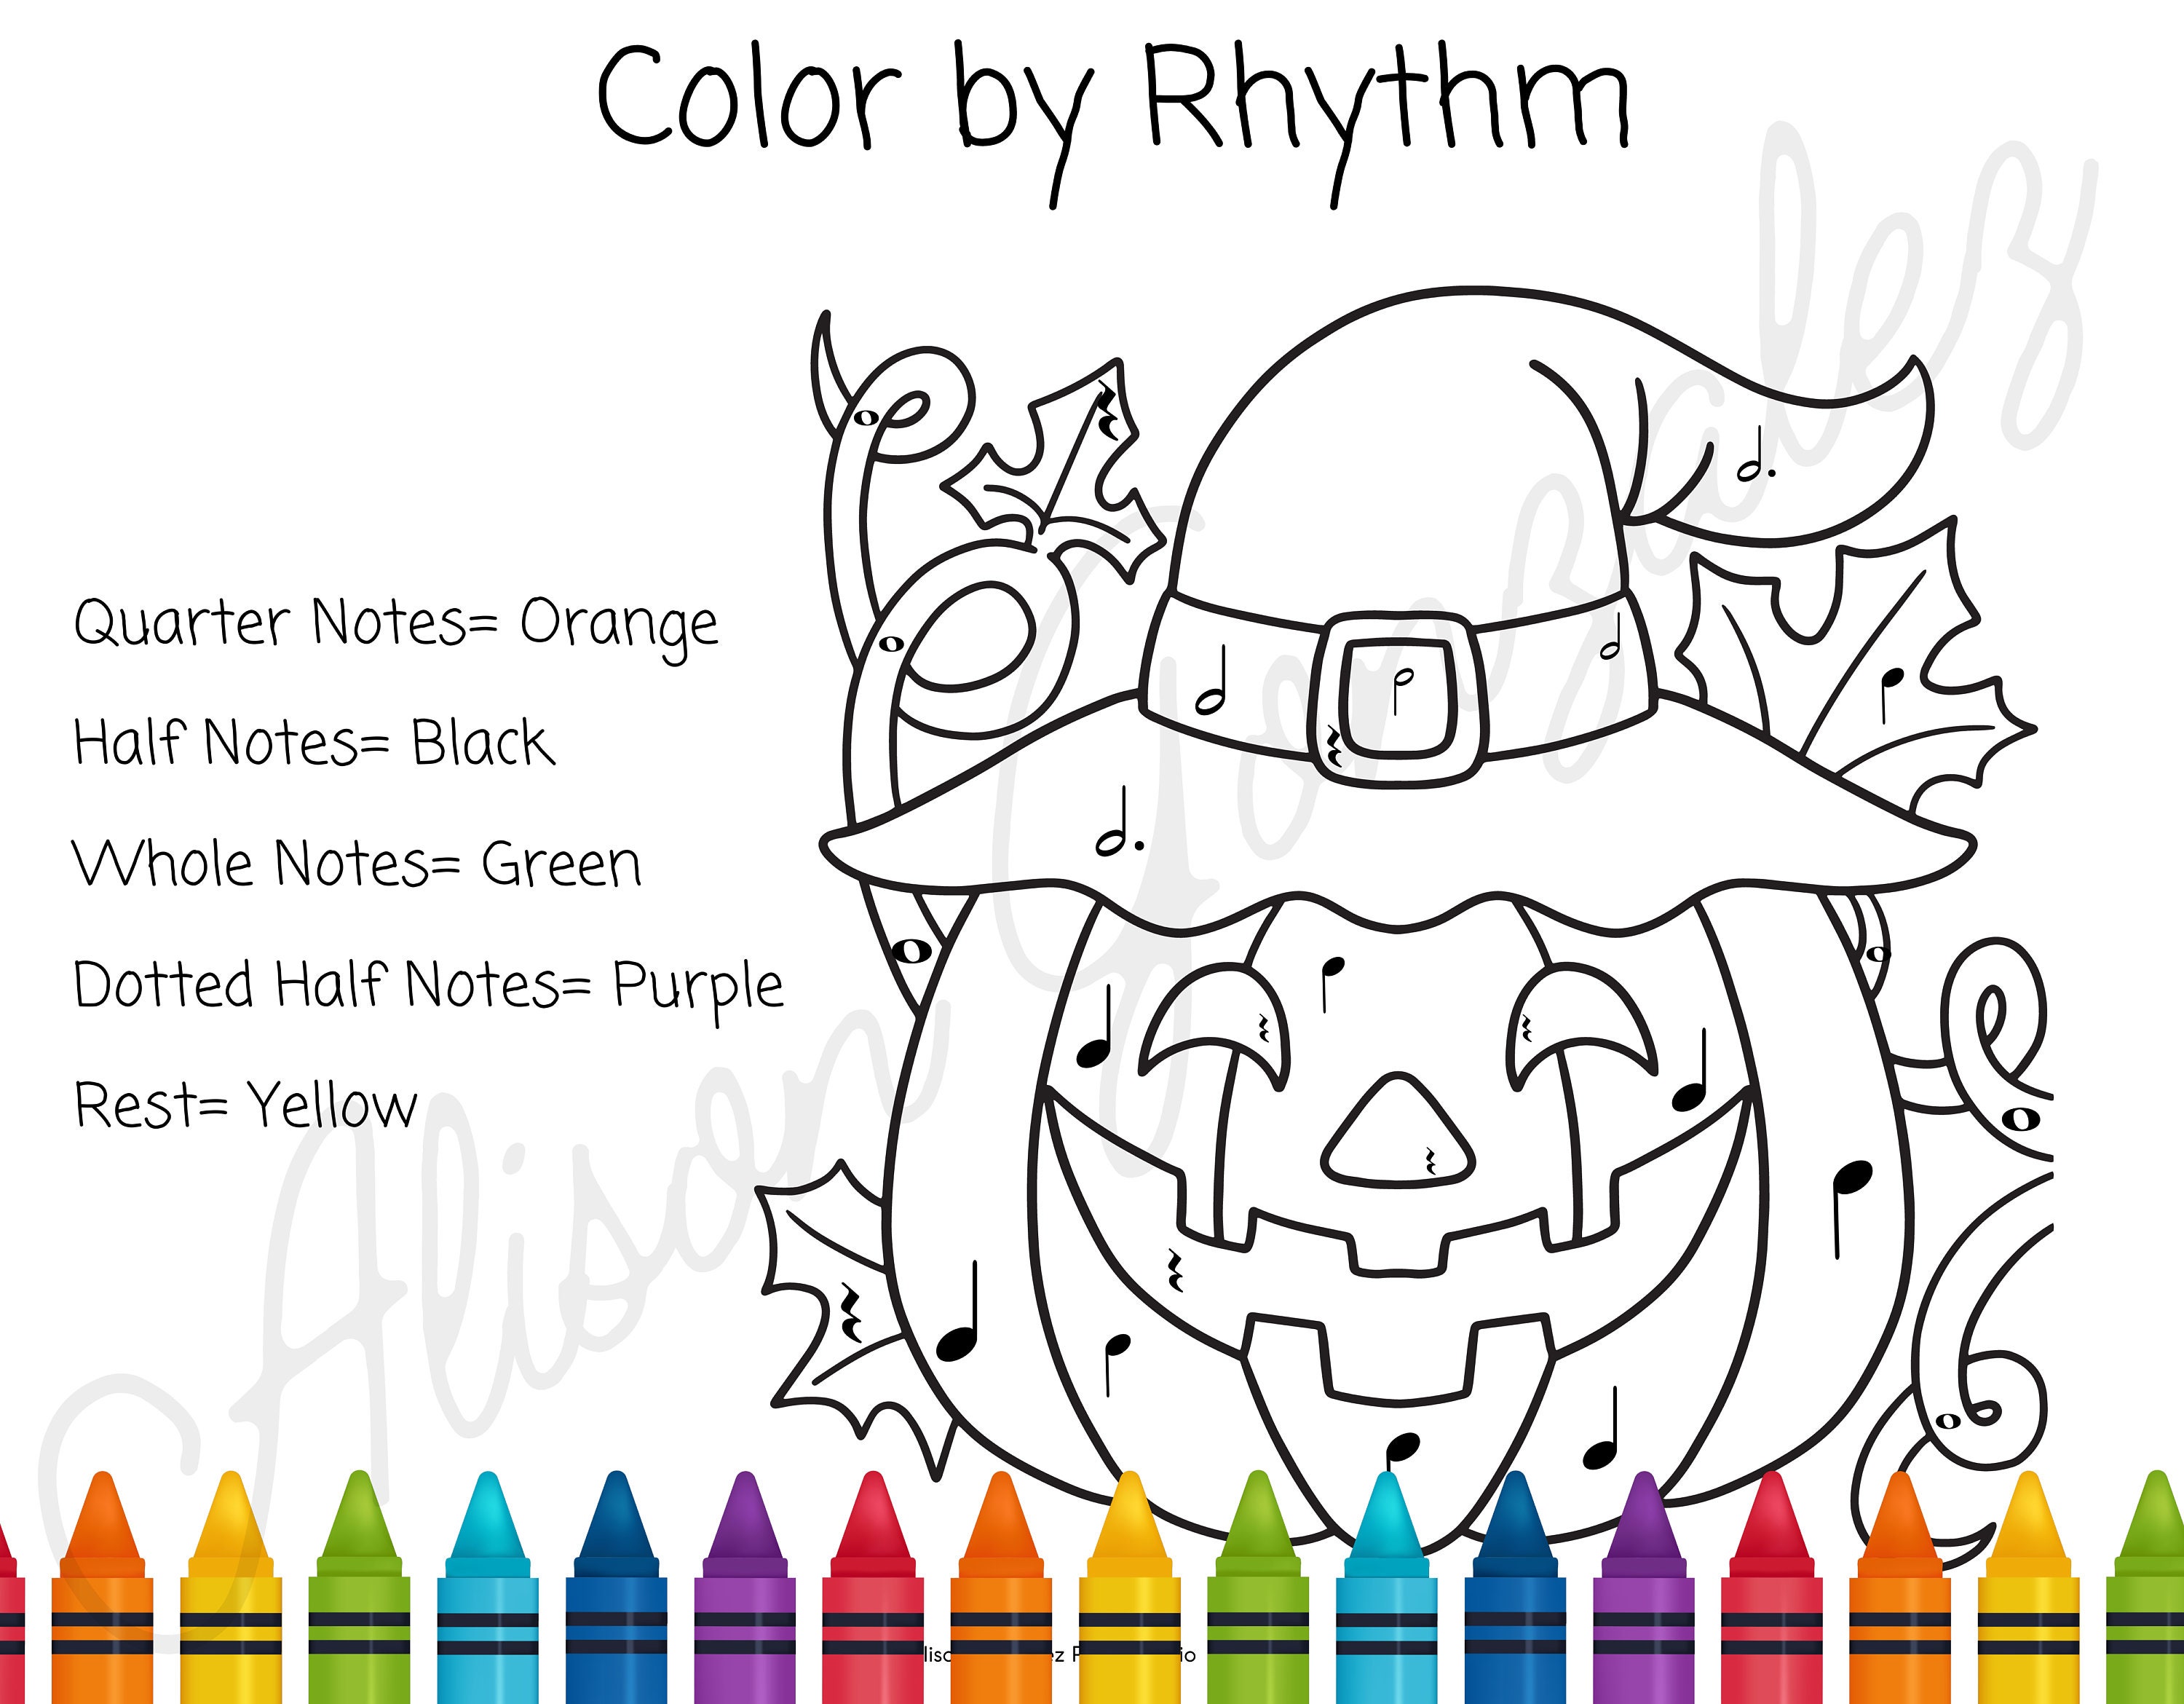 Primer level rhythm jackolantern color by number music piano lessons tool for learning musical symbols digital download